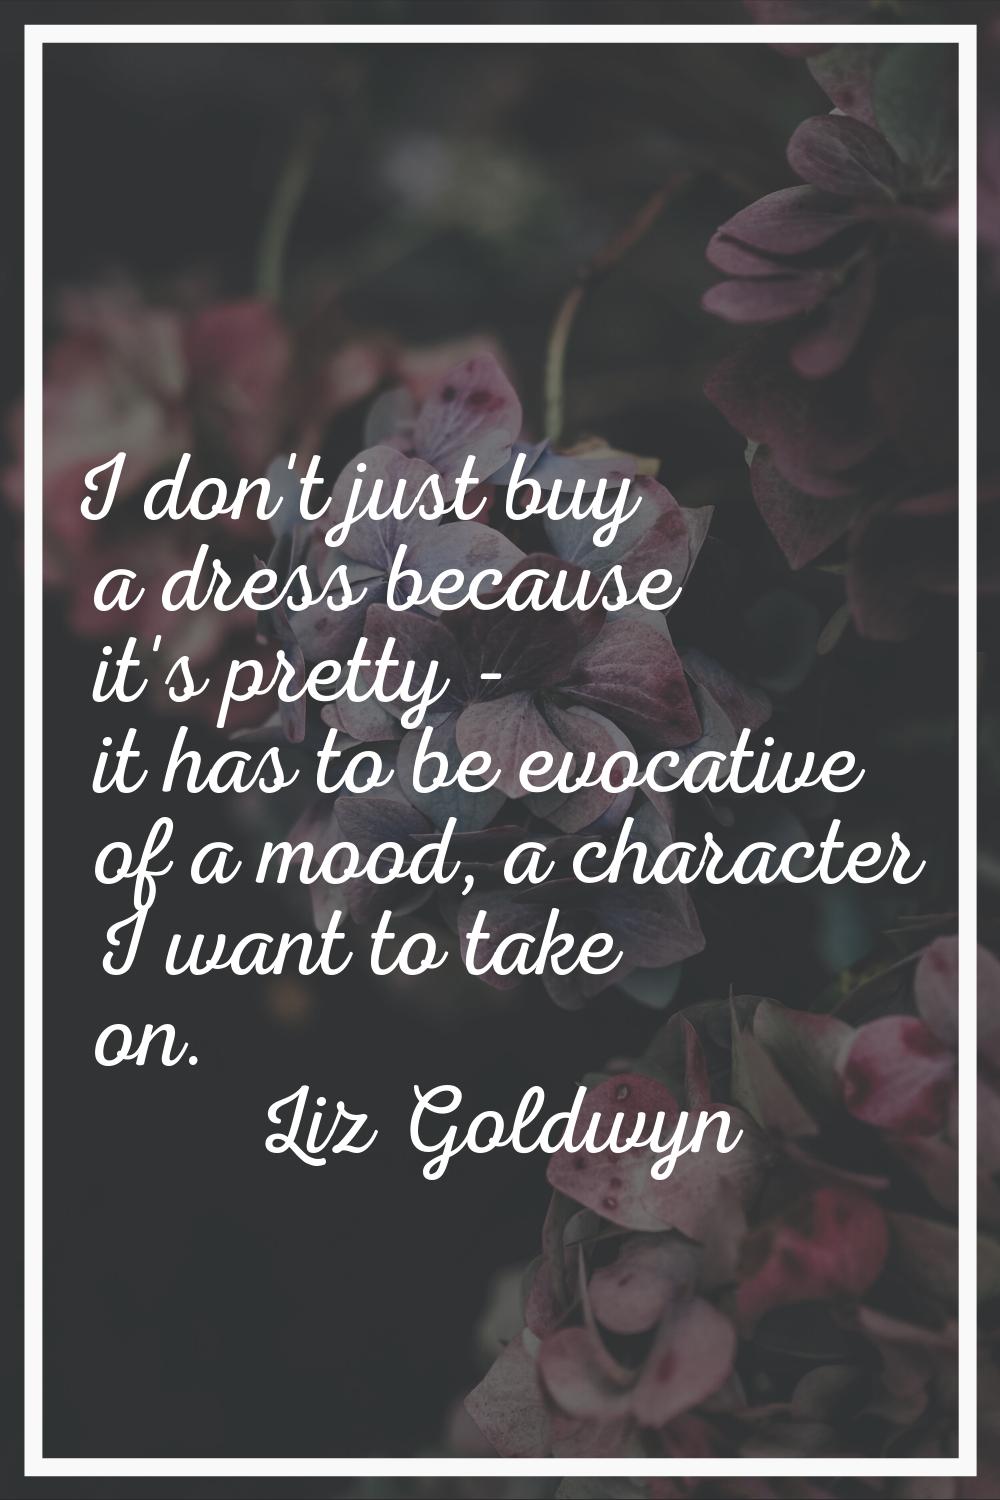 I don't just buy a dress because it's pretty - it has to be evocative of a mood, a character I want